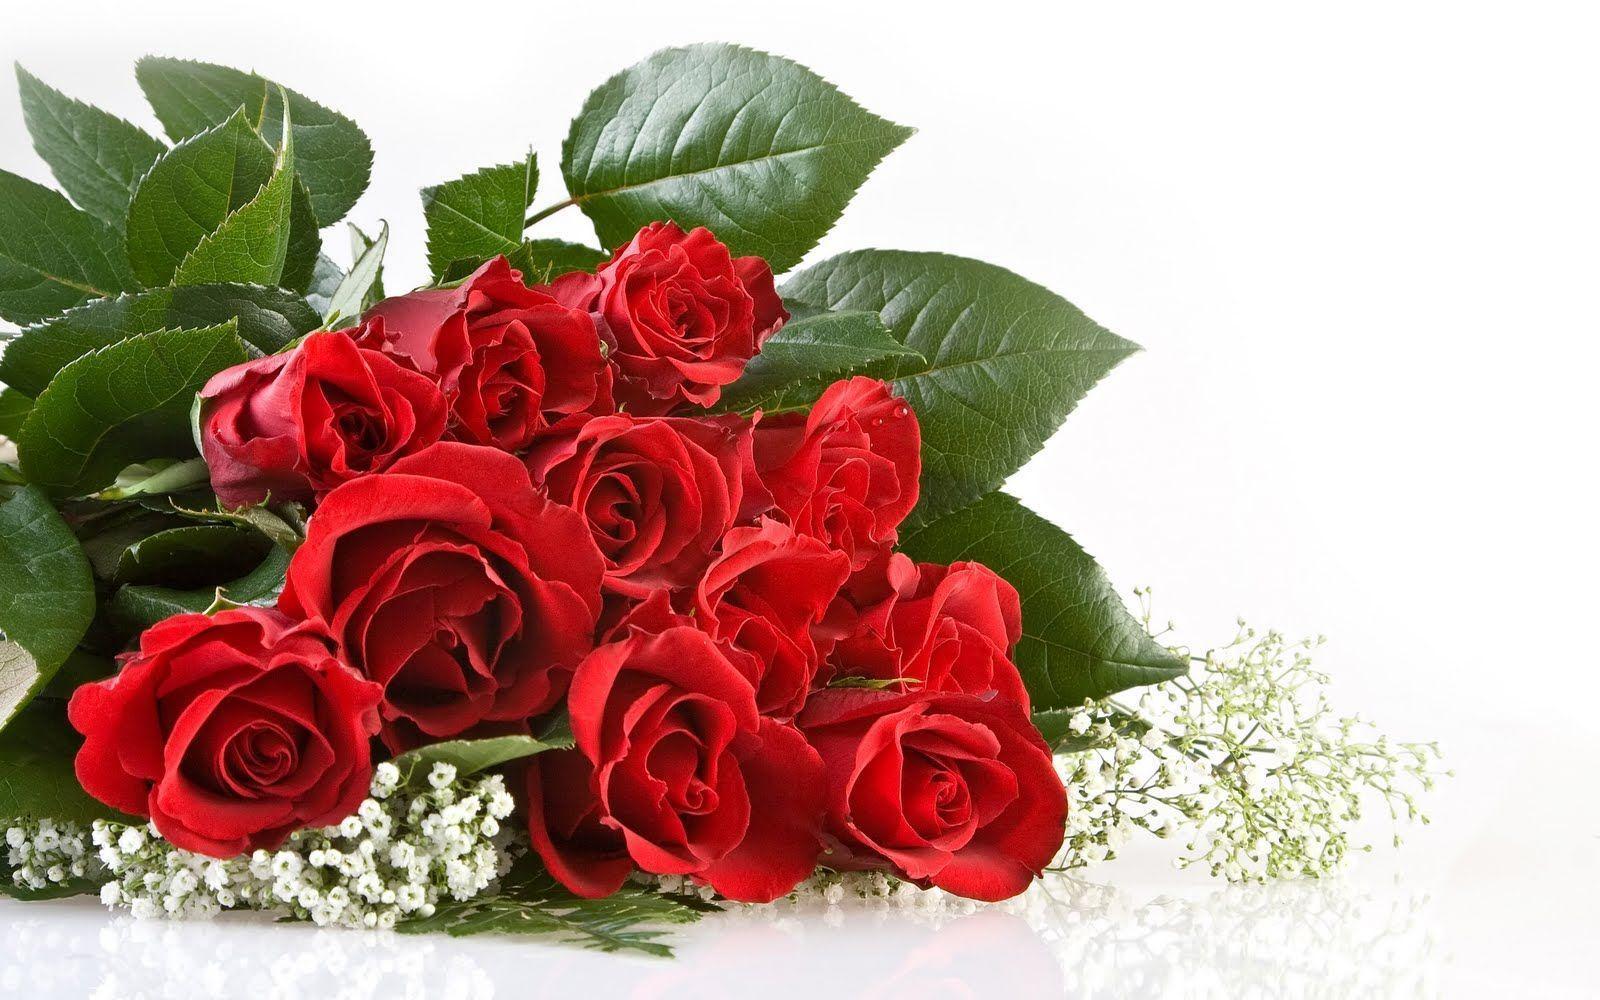 Red Rose Flowers Background 1 HD Wallpapercom